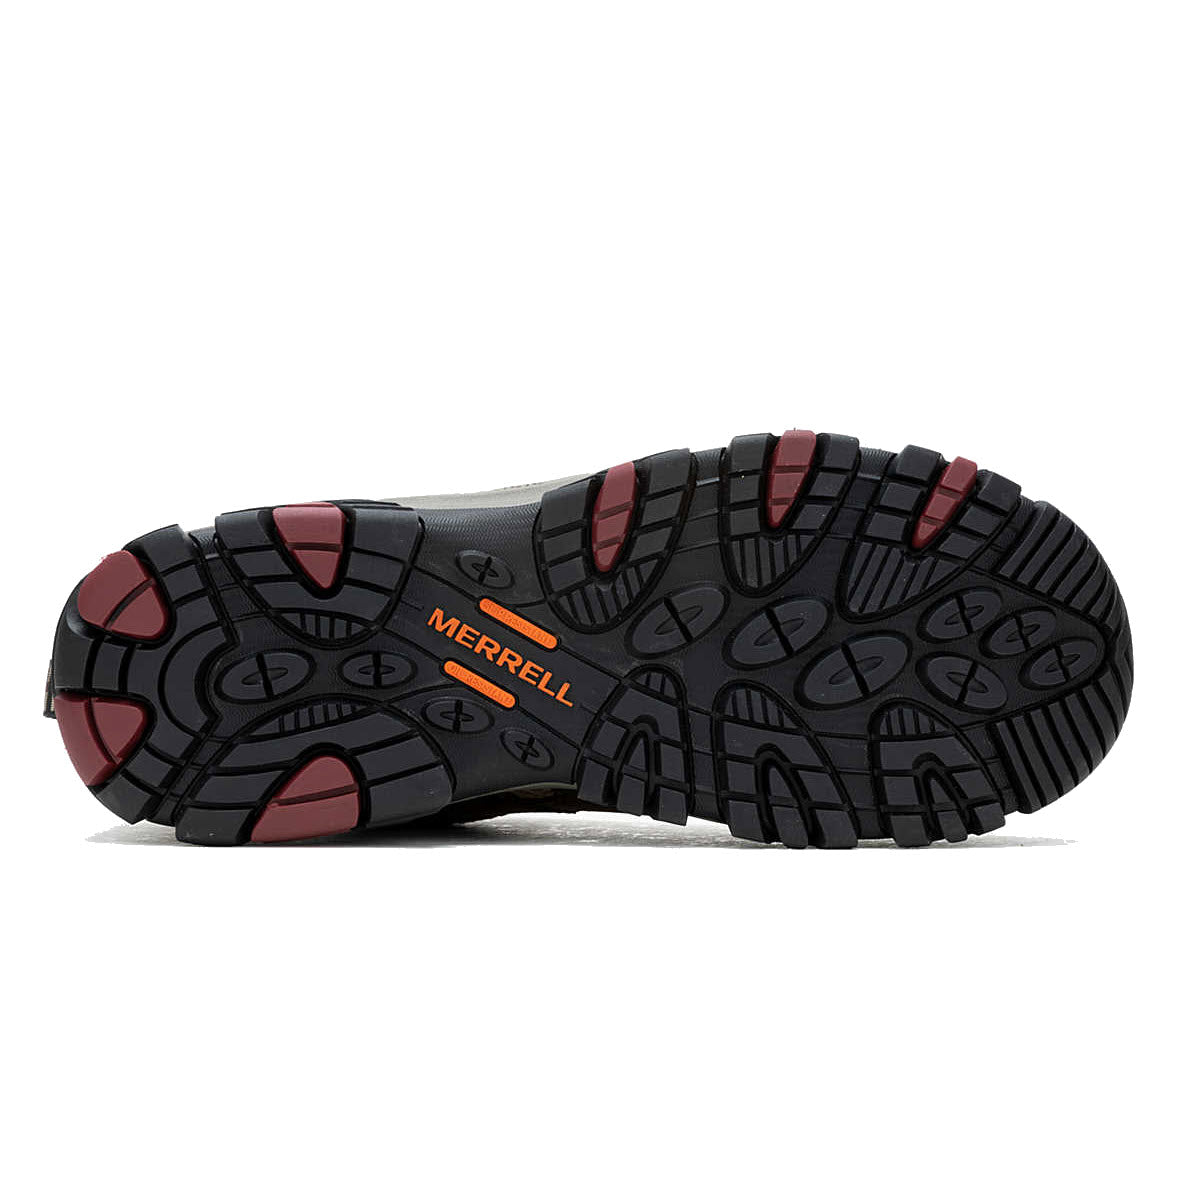 Sole of a Merrell Moab Vertex 2 low hiking shoe displaying black tread with red accents, featuring EH-rated protection and the Merrell logo.